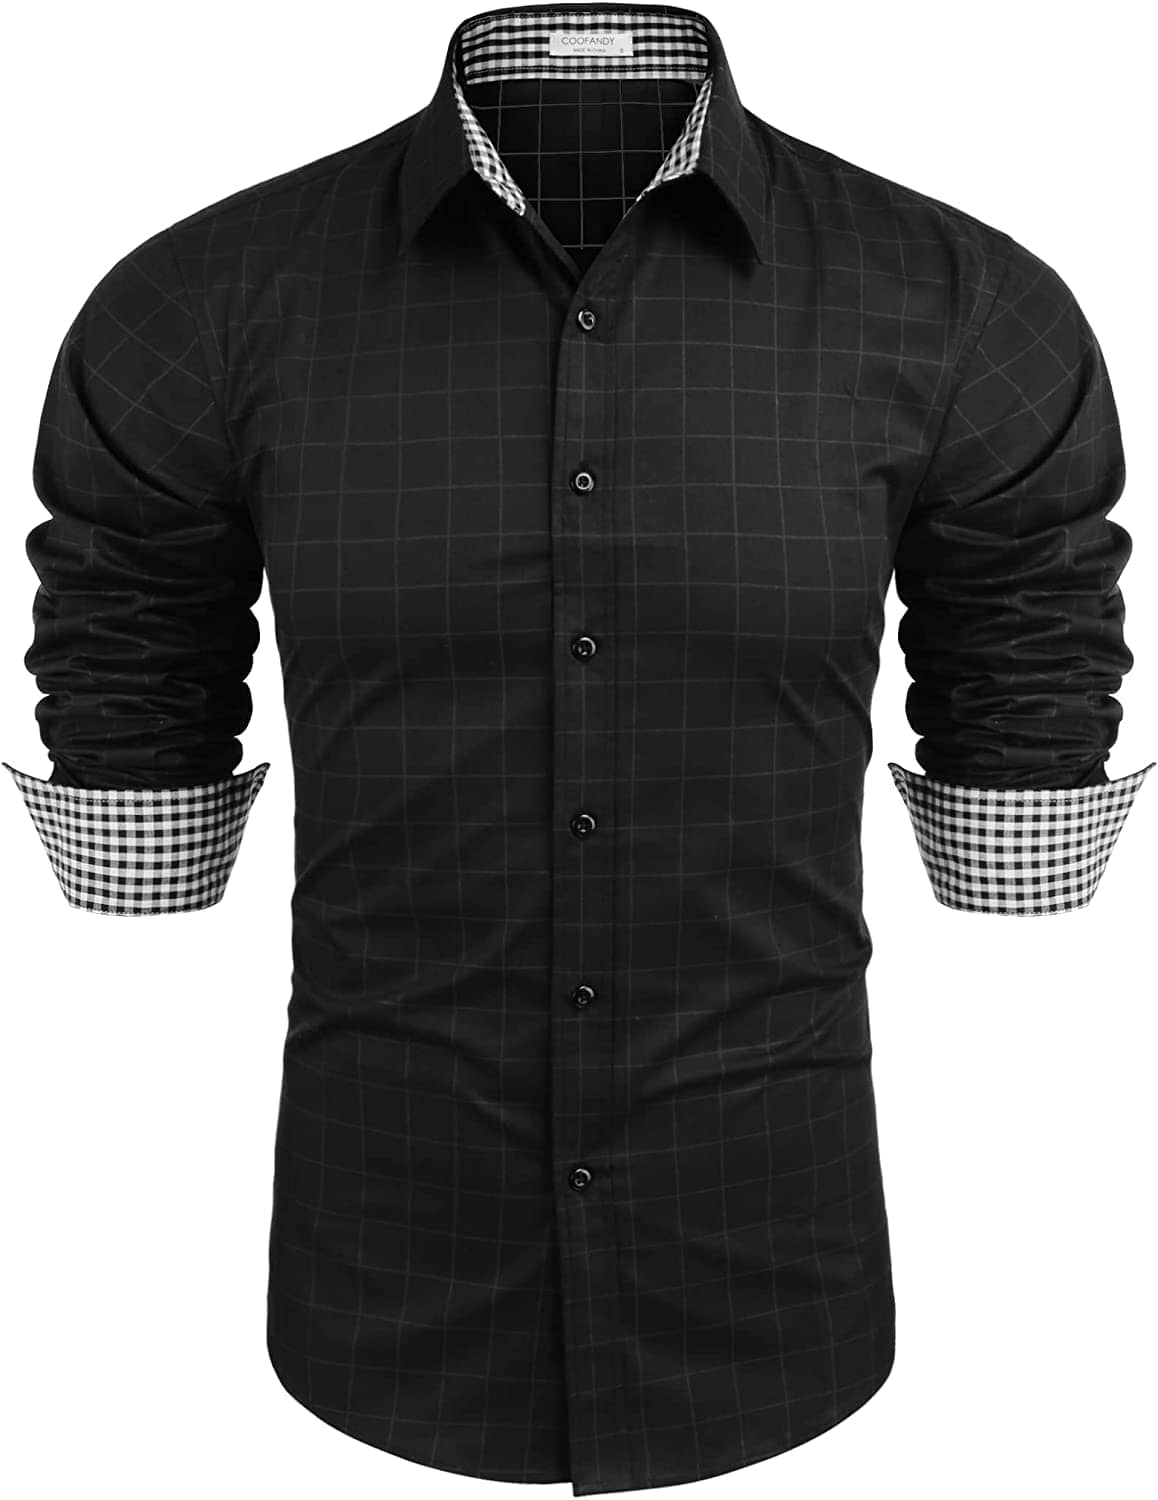 Business Long Sleeve Slim Fit Dress Shirt (US Only) Shirts COOFANDY Store Black-Square Plaid S 